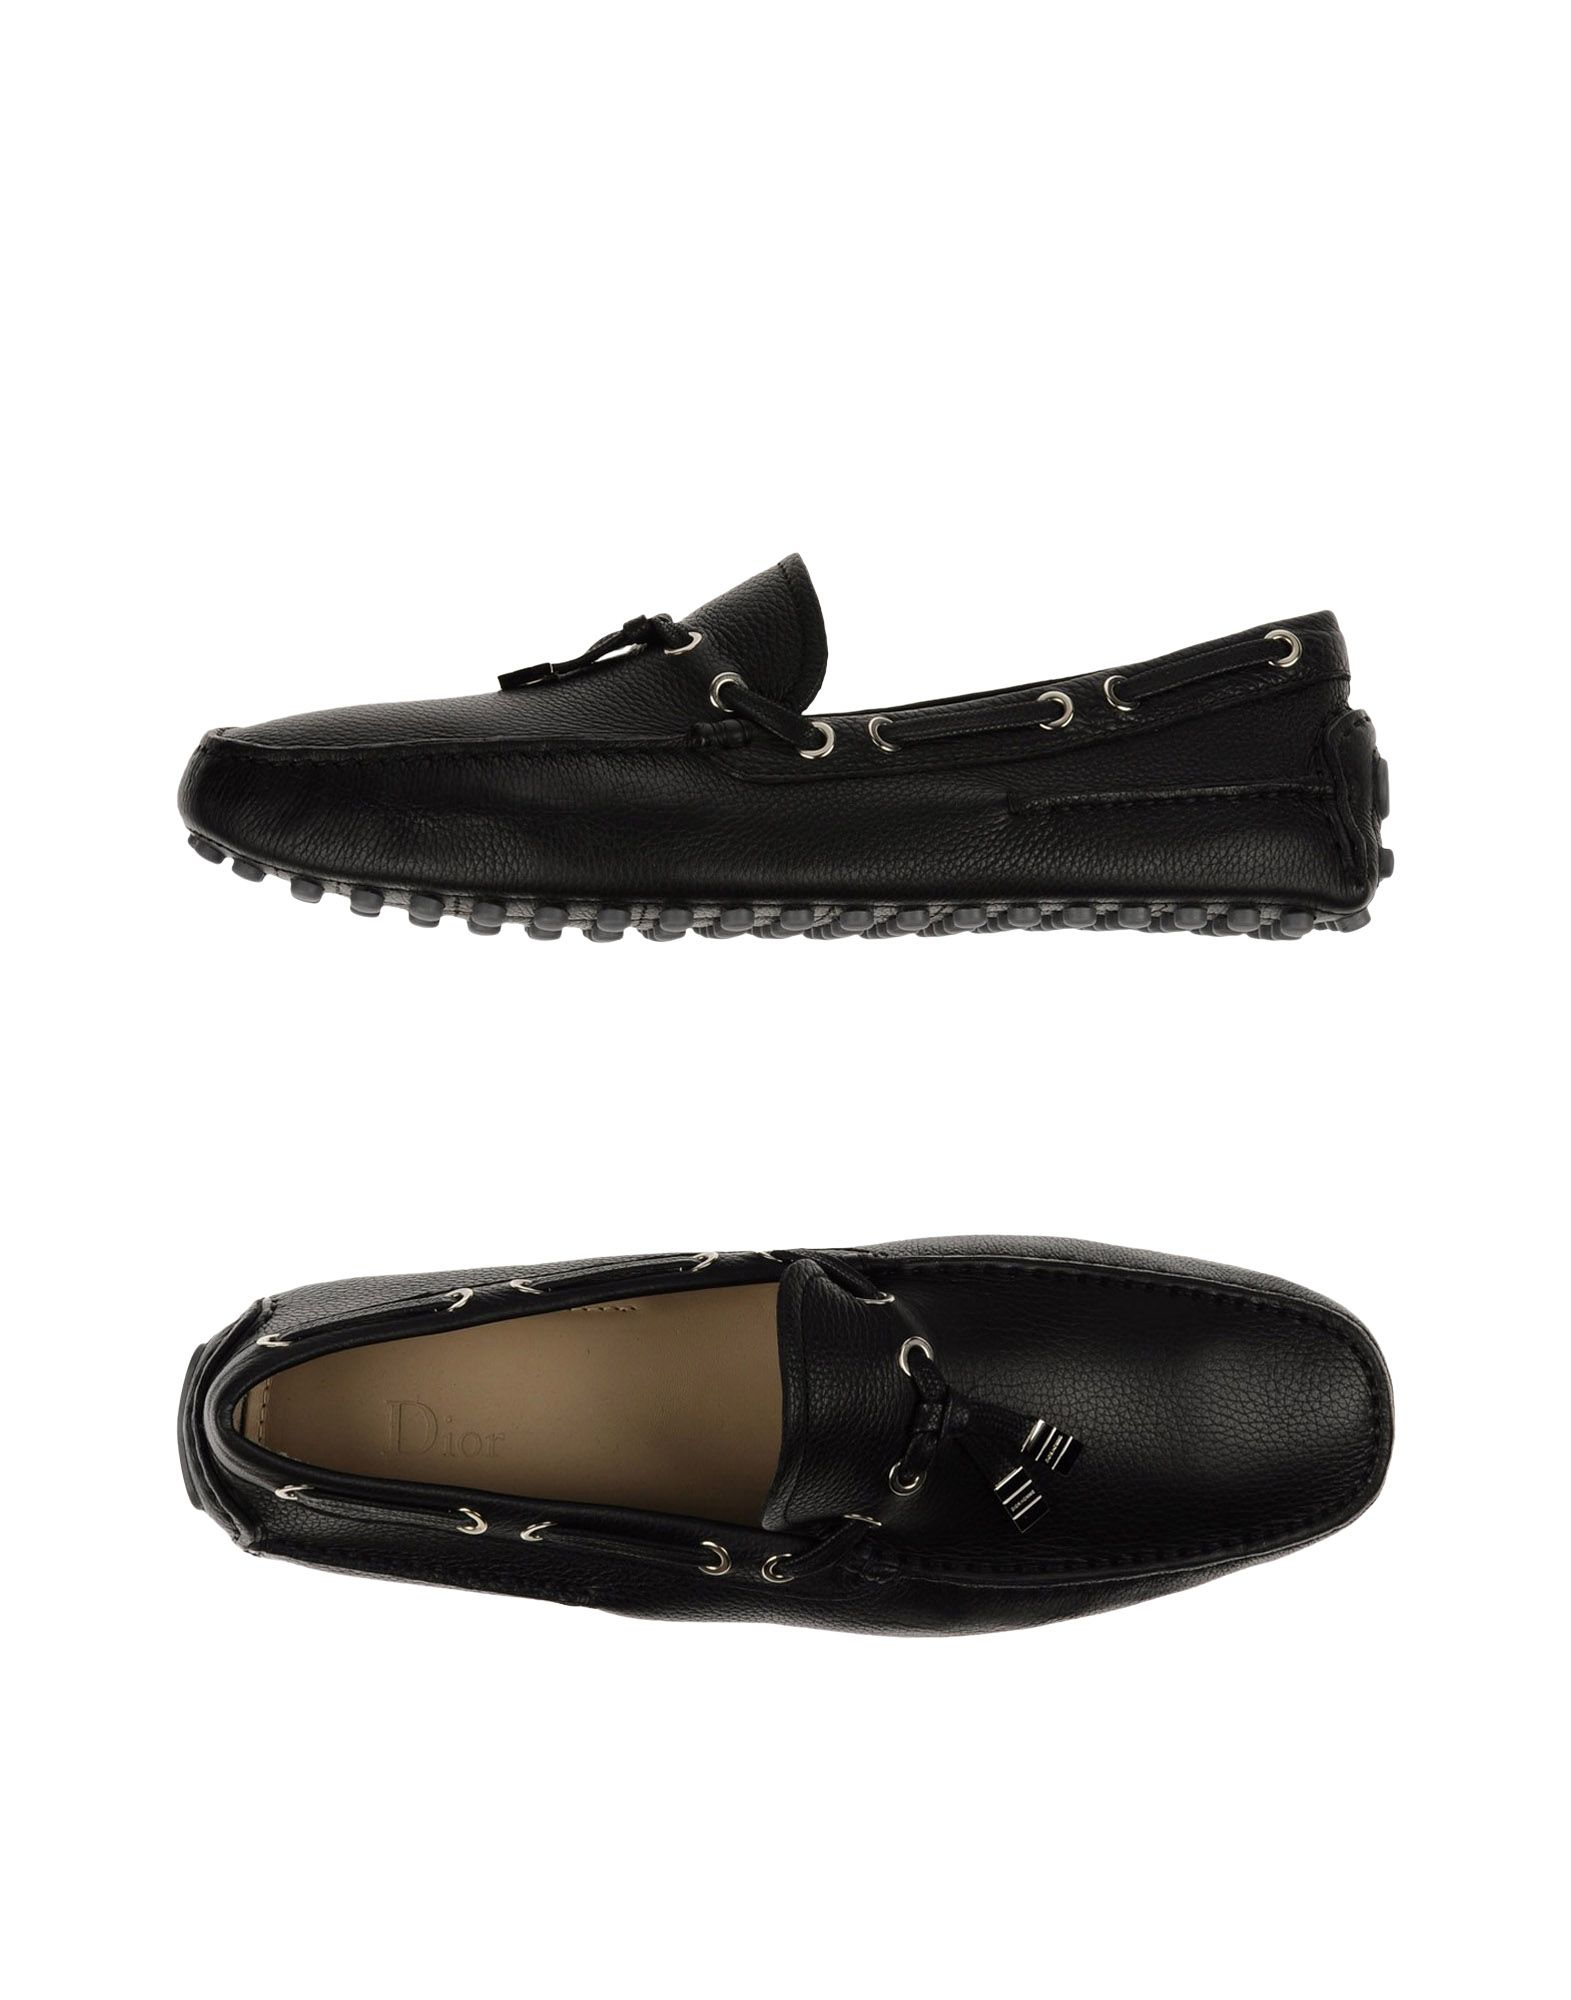 Dior Homme Leather Moccasins in Black 